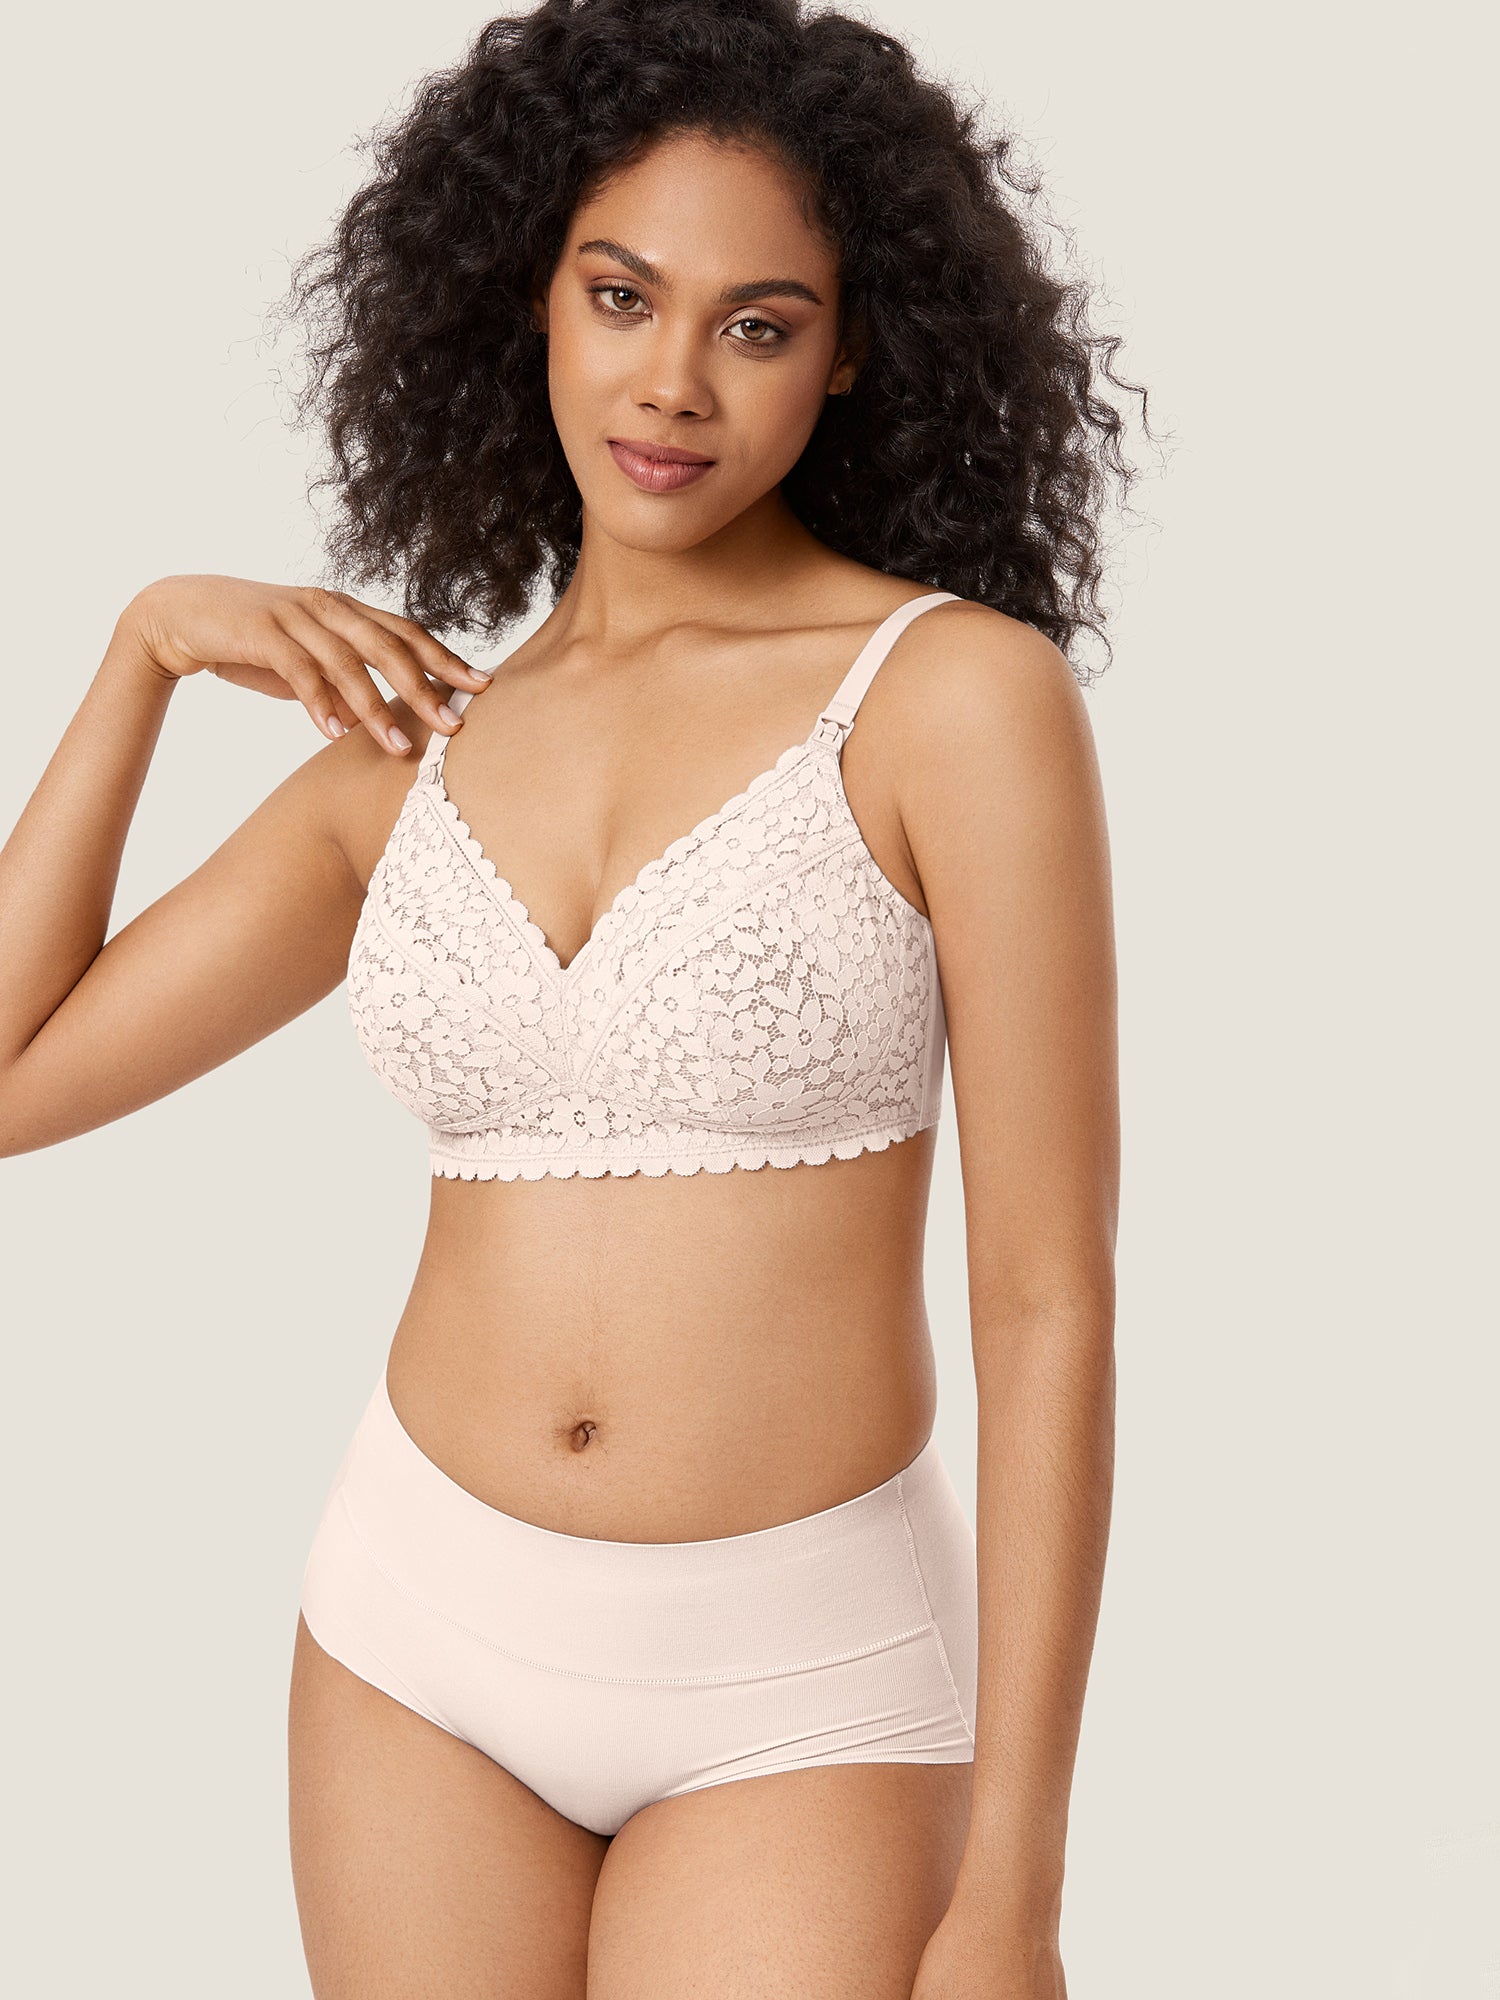 Lace Hands Free Pumping Bra Rose White